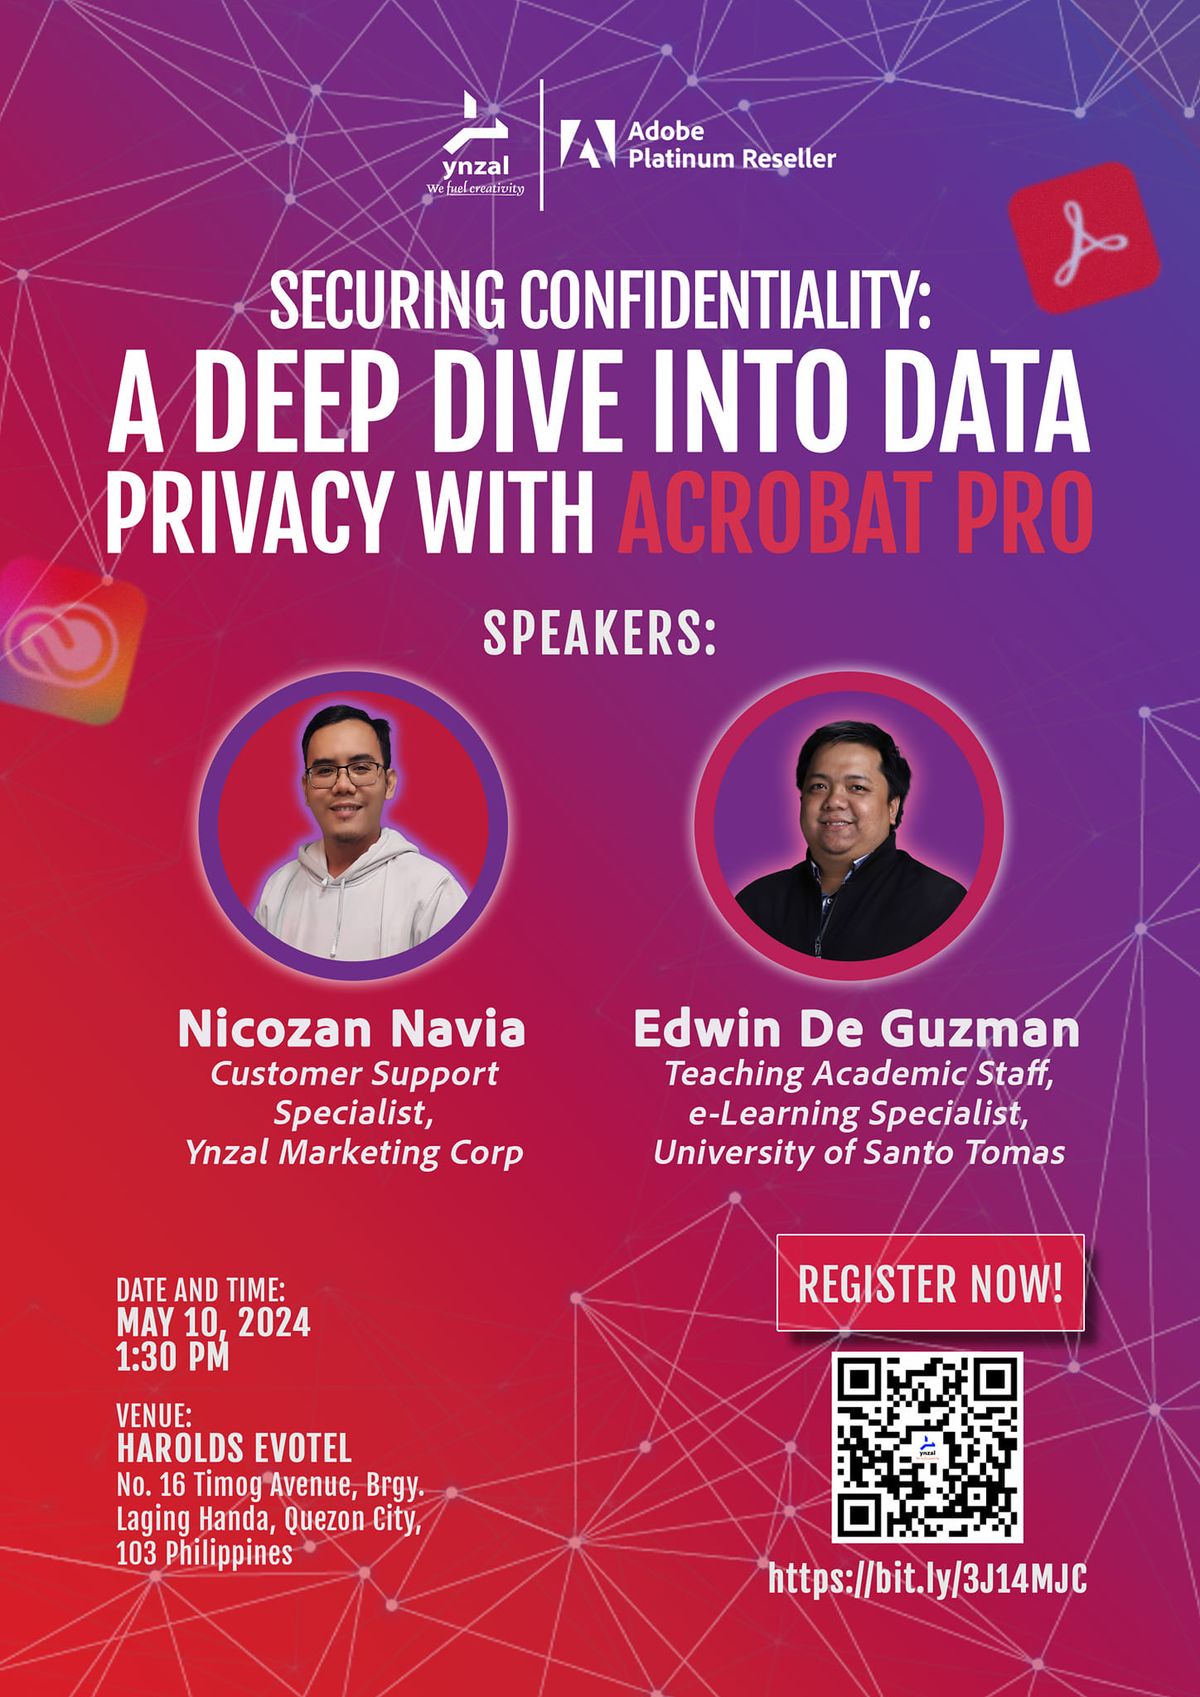 ?\ufe0f Join us for an exclusive seminar on "Securing CONFIDENTIALITY: A DEEP DIVE INTO DATA PRIVACY WIT